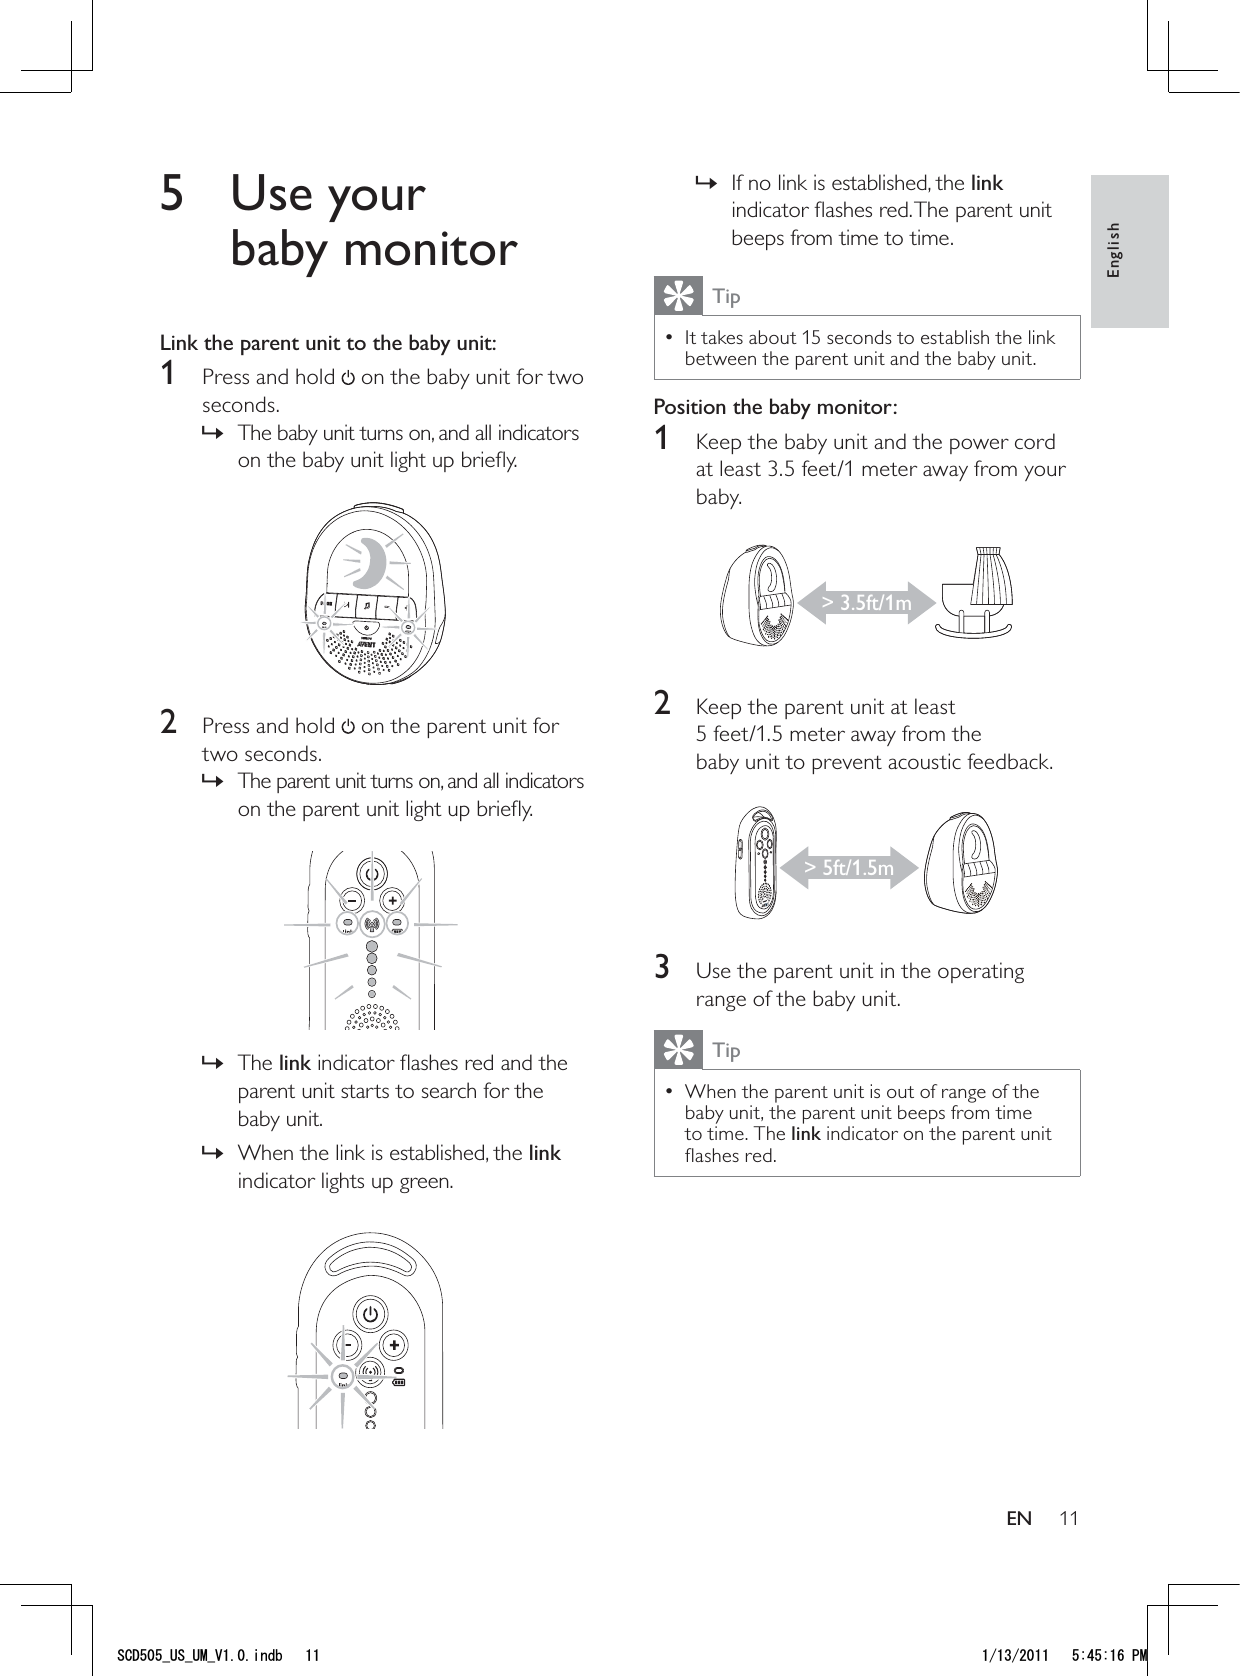 11If no link is established, the  »link indicator ﬂashes red. The parent unit beeps from time to time.TipIt takes about 15 seconds to establish the link  • between the parent unit and the baby unit.Position the baby monitor:1  Keep the baby unit and the power cord at least 3.5 feet/1 meter away from your baby. 2  Keep the parent unit at least 5 feet/1.5 meter away from the  baby unit to prevent acoustic feedback. 3  Use the parent unit in the operating range of the baby unit.TipWhen the parent unit is out of range of the  • baby unit, the parent unit beeps from time to time. The link indicator on the parent unit ﬂashes red. &gt; 3.5ft/1m&gt; 5ft/1.5m5 Use your baby monitorLink the parent unit to the baby unit:1  Press and hold   on the baby unit for two seconds.The baby unit turns on, and all indicators  »on the baby unit light up brieﬂy. 2  Press and hold   on the parent unit for two seconds.The parent unit turns on, and all indicators  »on the parent unit light up brieﬂy.  The  »link indicator ﬂashes red and the parent unit starts to search for the baby unit.When the link is established, the  »link indicator lights up green. EnglishEN5%&amp;A75A7/A8KPFD 2/